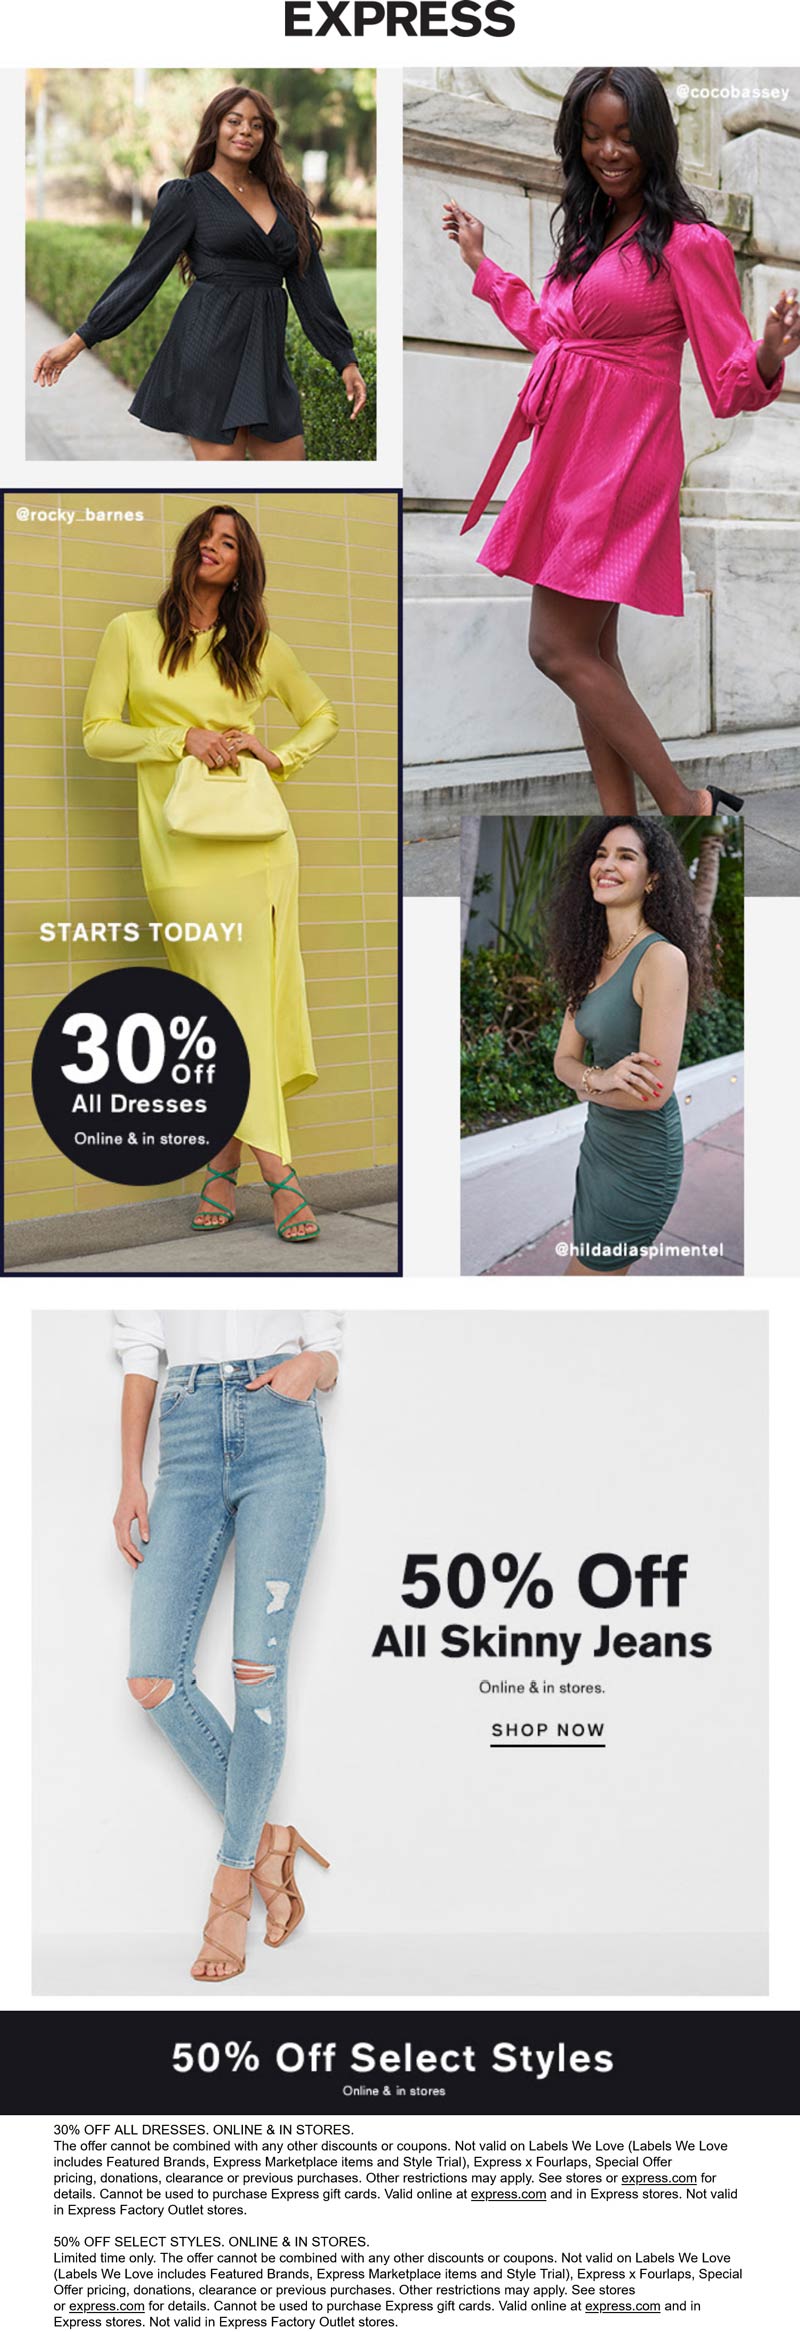 Express stores Coupon  30% off all dresses & more at Express, ditto online #express 